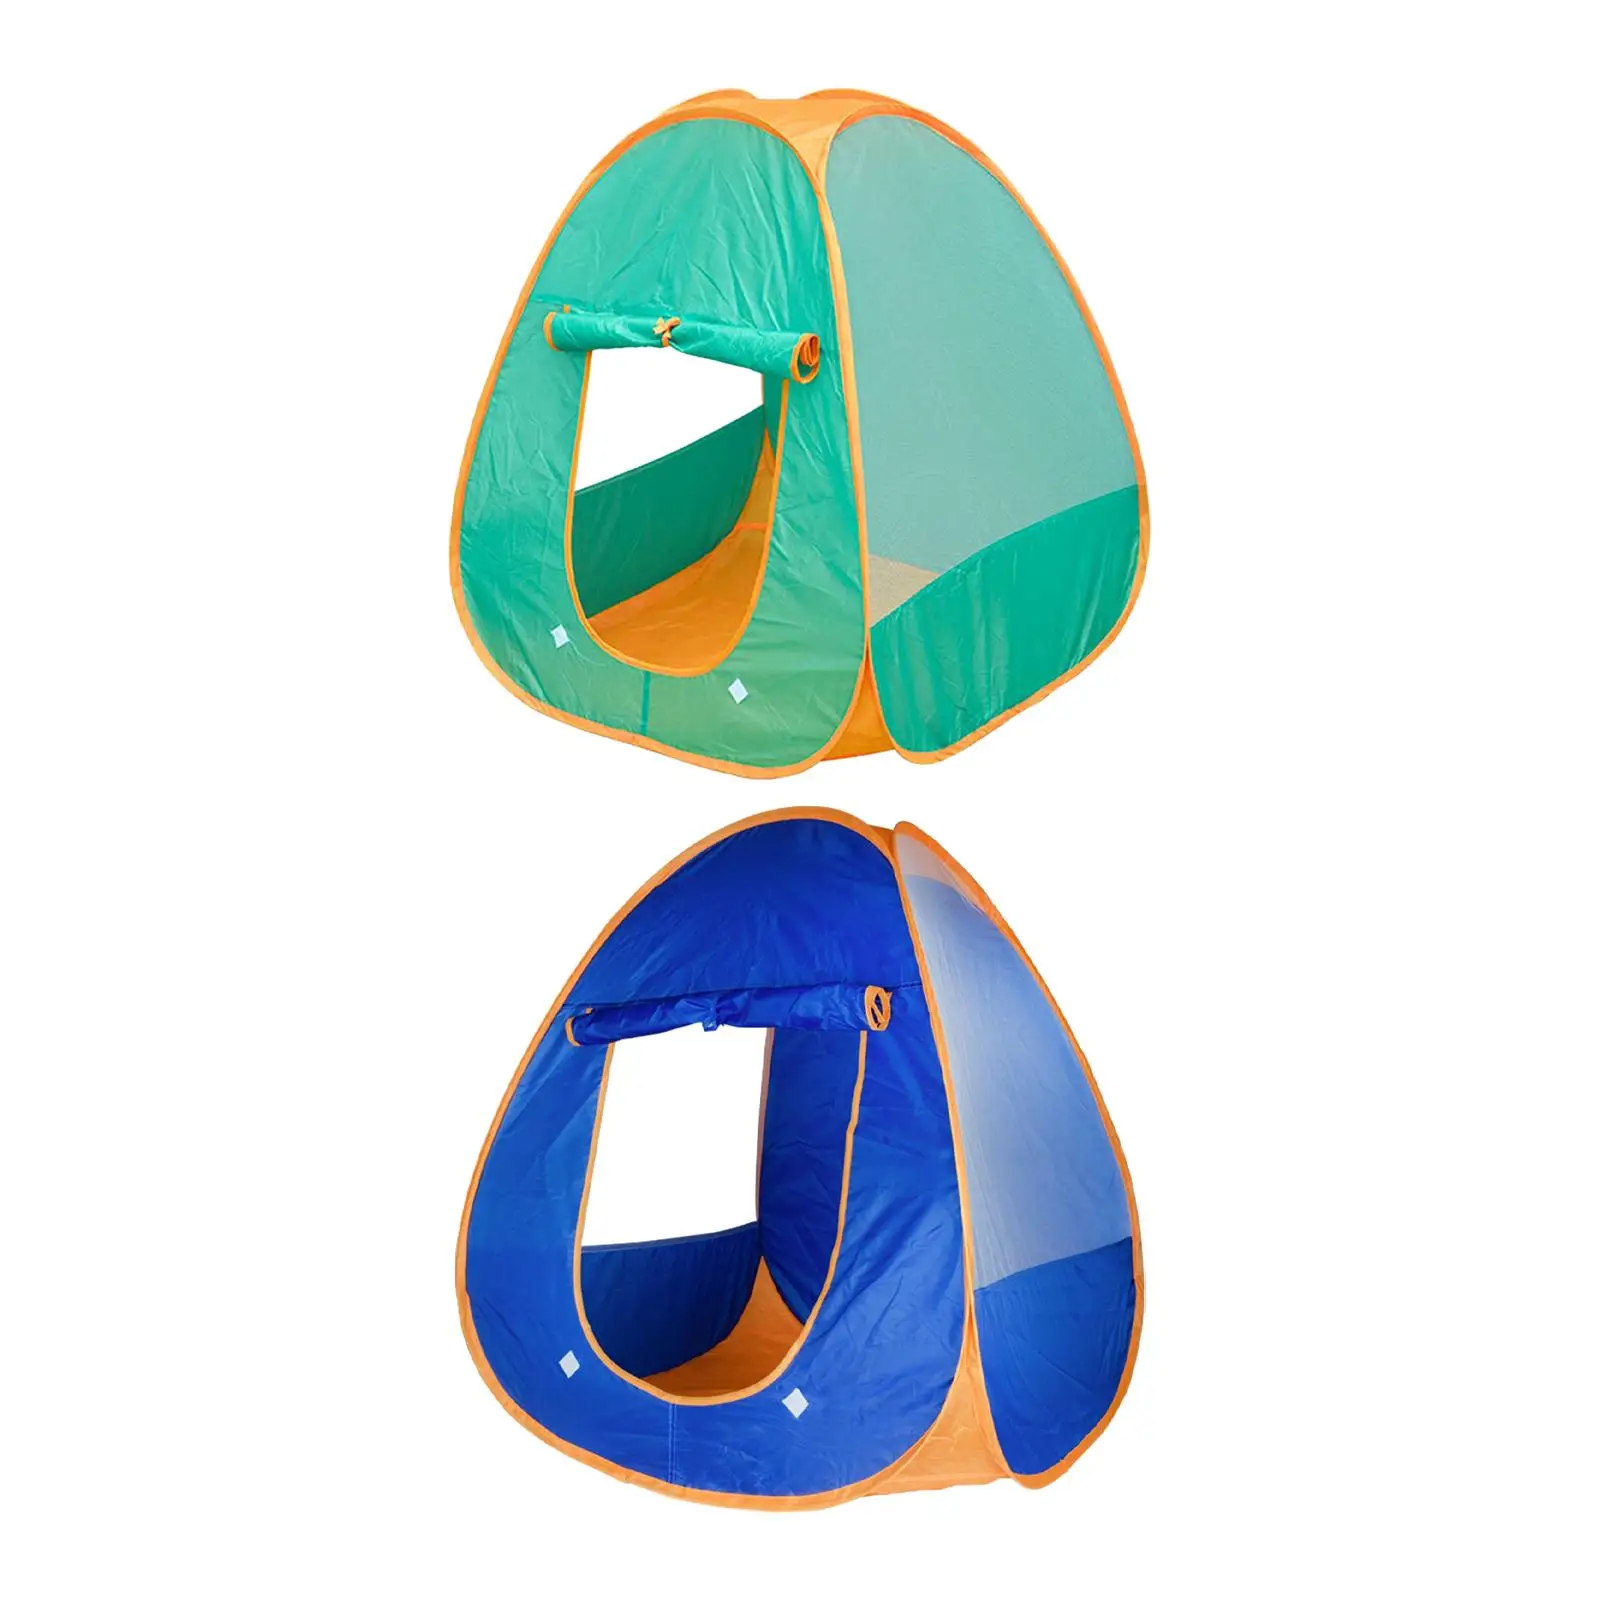 Kids Play Tent Collapsible Playhouse Toys for Parties Beach Indoor Outdoor